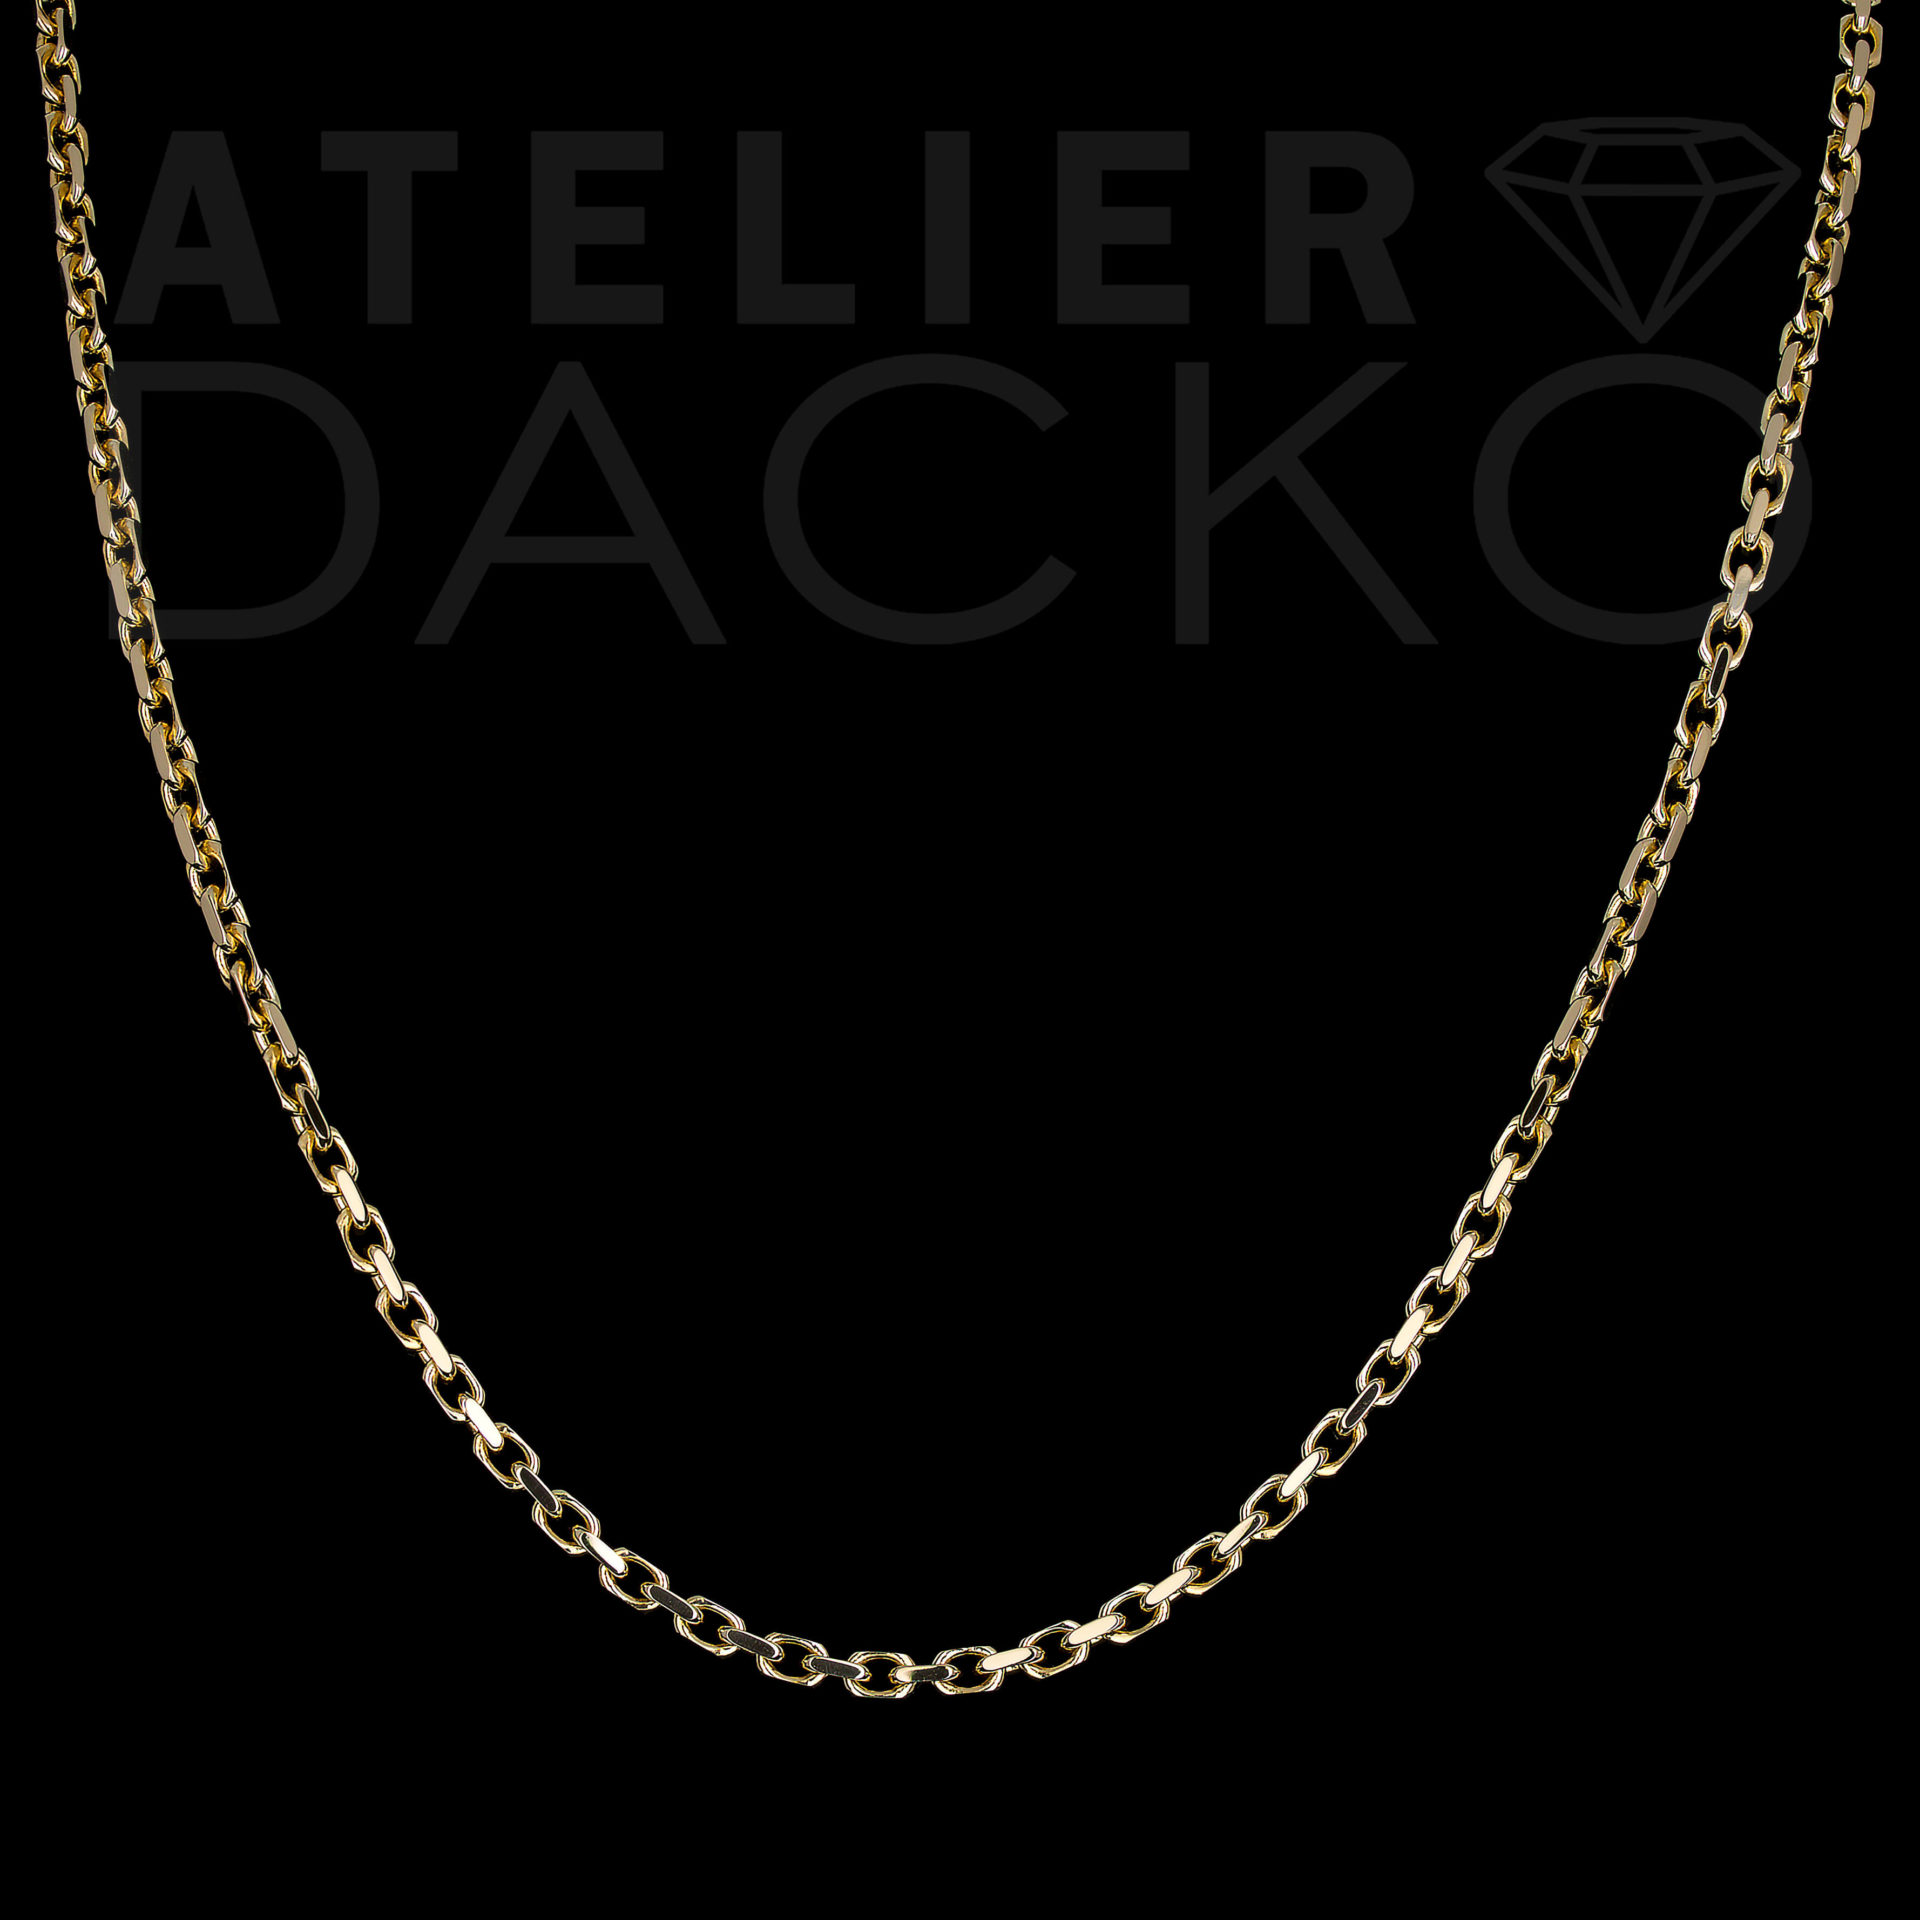 AD032 - 3 MM HermesOdin Link Chain in Yellow Gold - 1